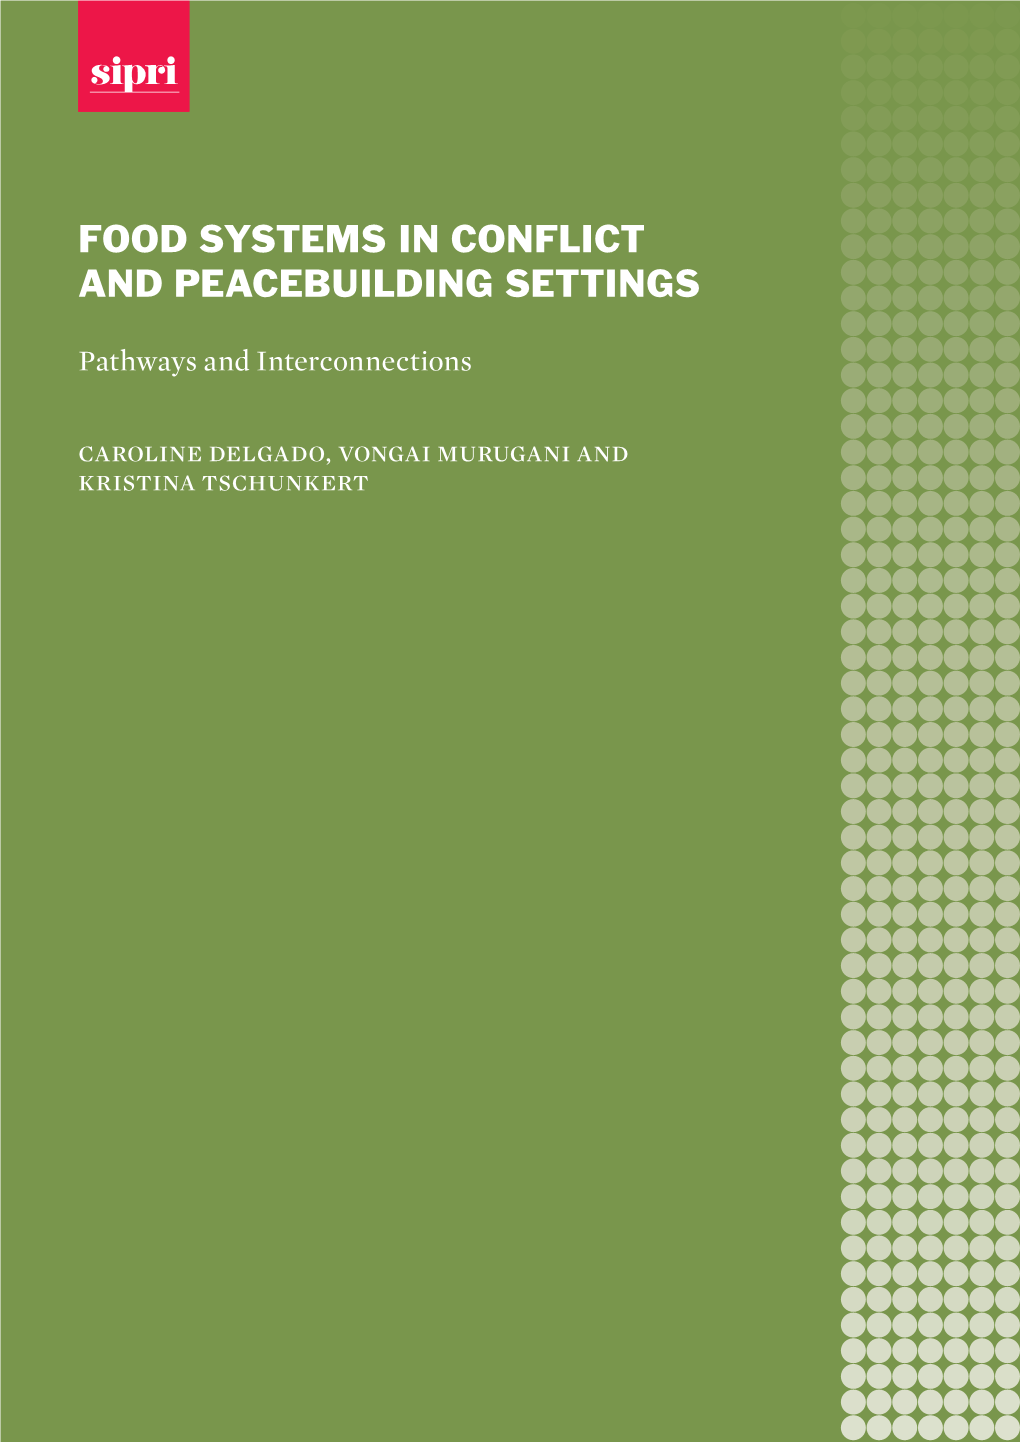 Food Systems in Conflict and Peacebuilding Settings